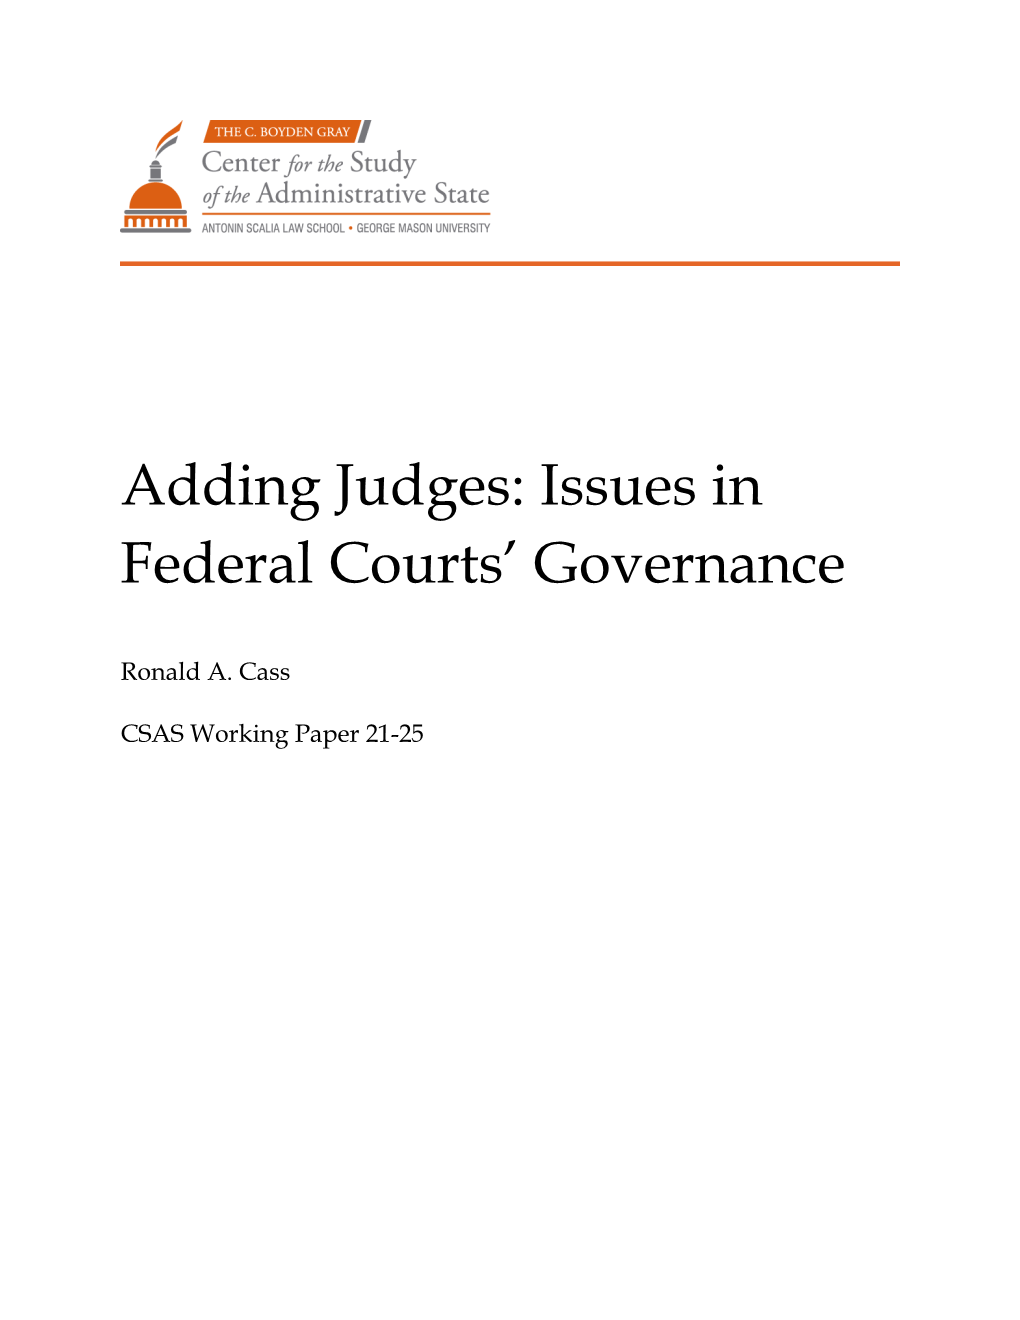 Adding Judges: Issues in Federal Courts’ Governance